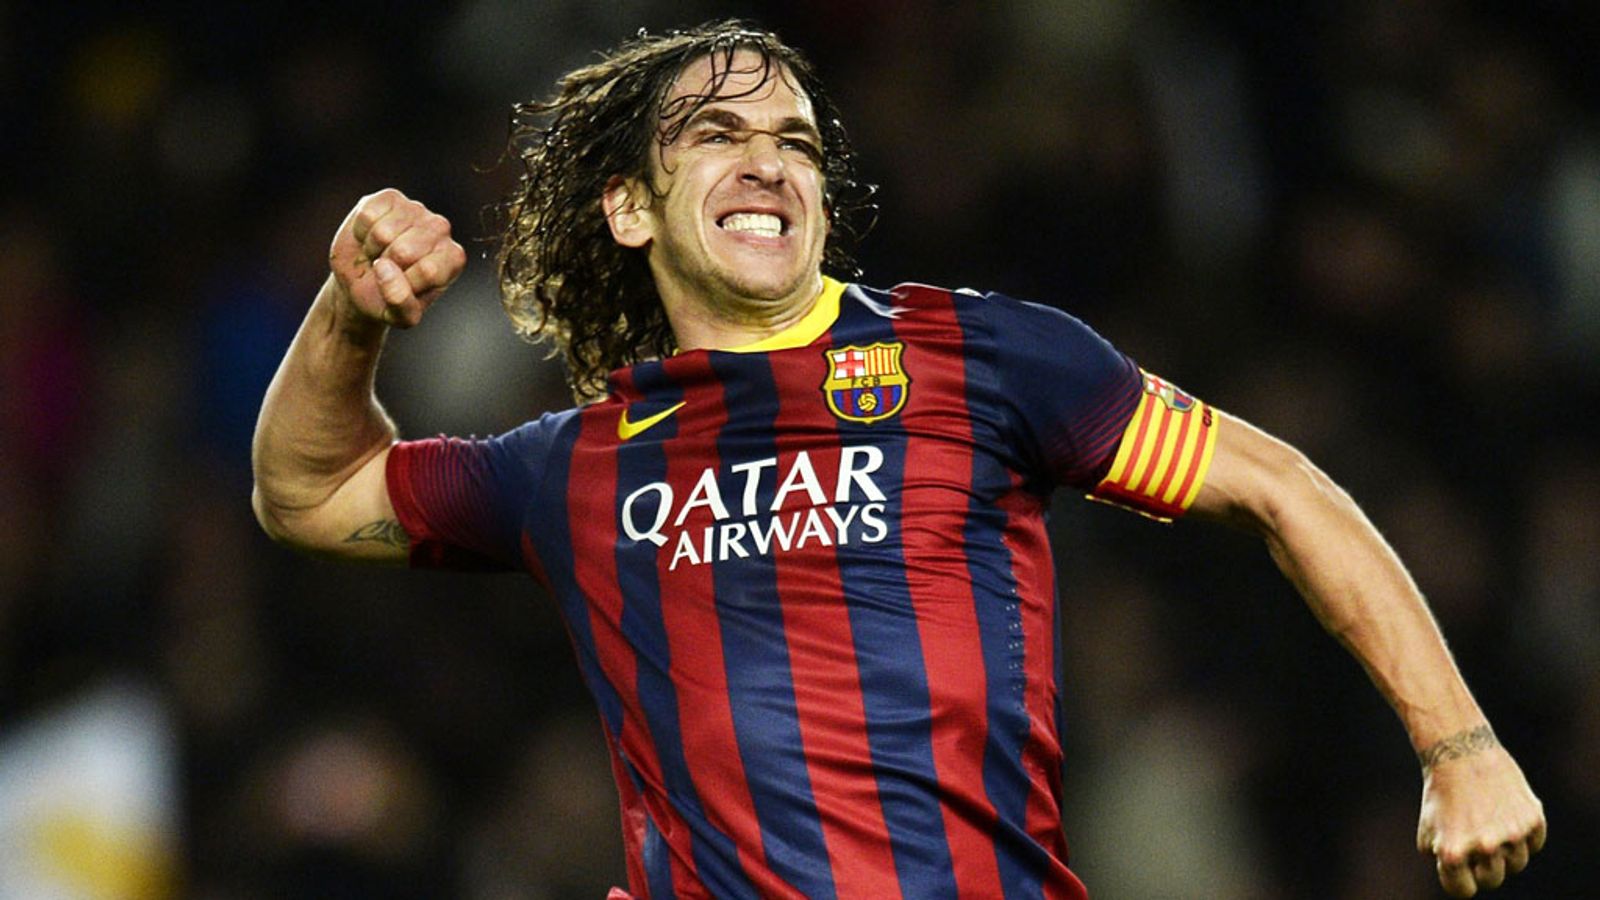  Carles Puyol celebrates his debut goal for Barcelona against Real Madrid in 2003.